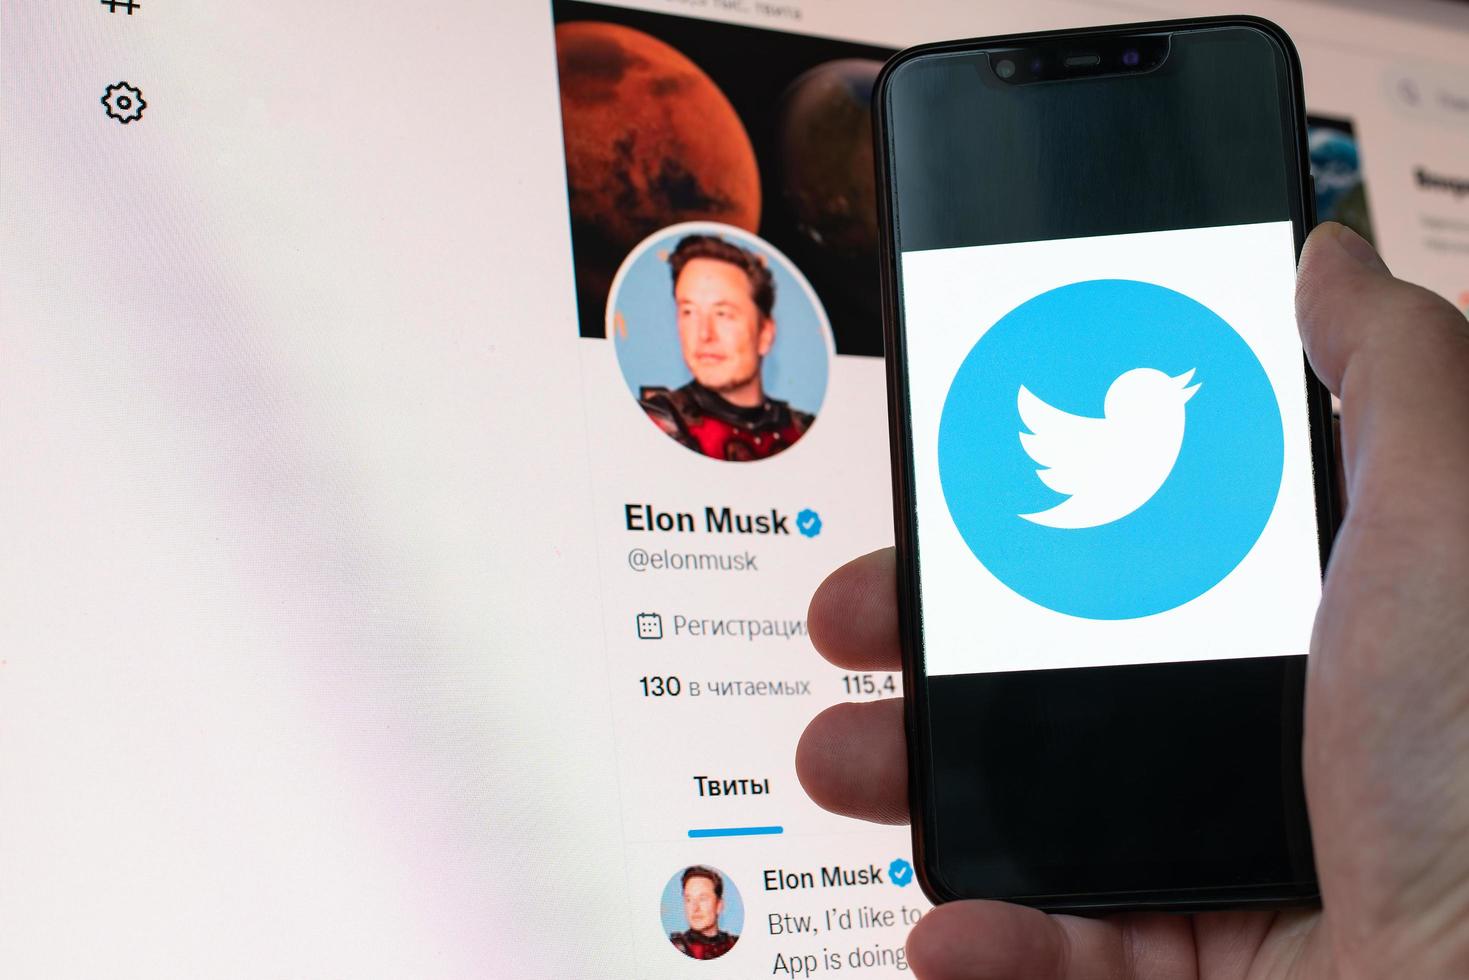 Kyiv, Ukraine, November 14, 2022 - Elon Musk official Twitter profile on monitor and social media logo seen displayed on a smartphone close up in hand. Elon Musk reaches agreement to acquire Twitter photo